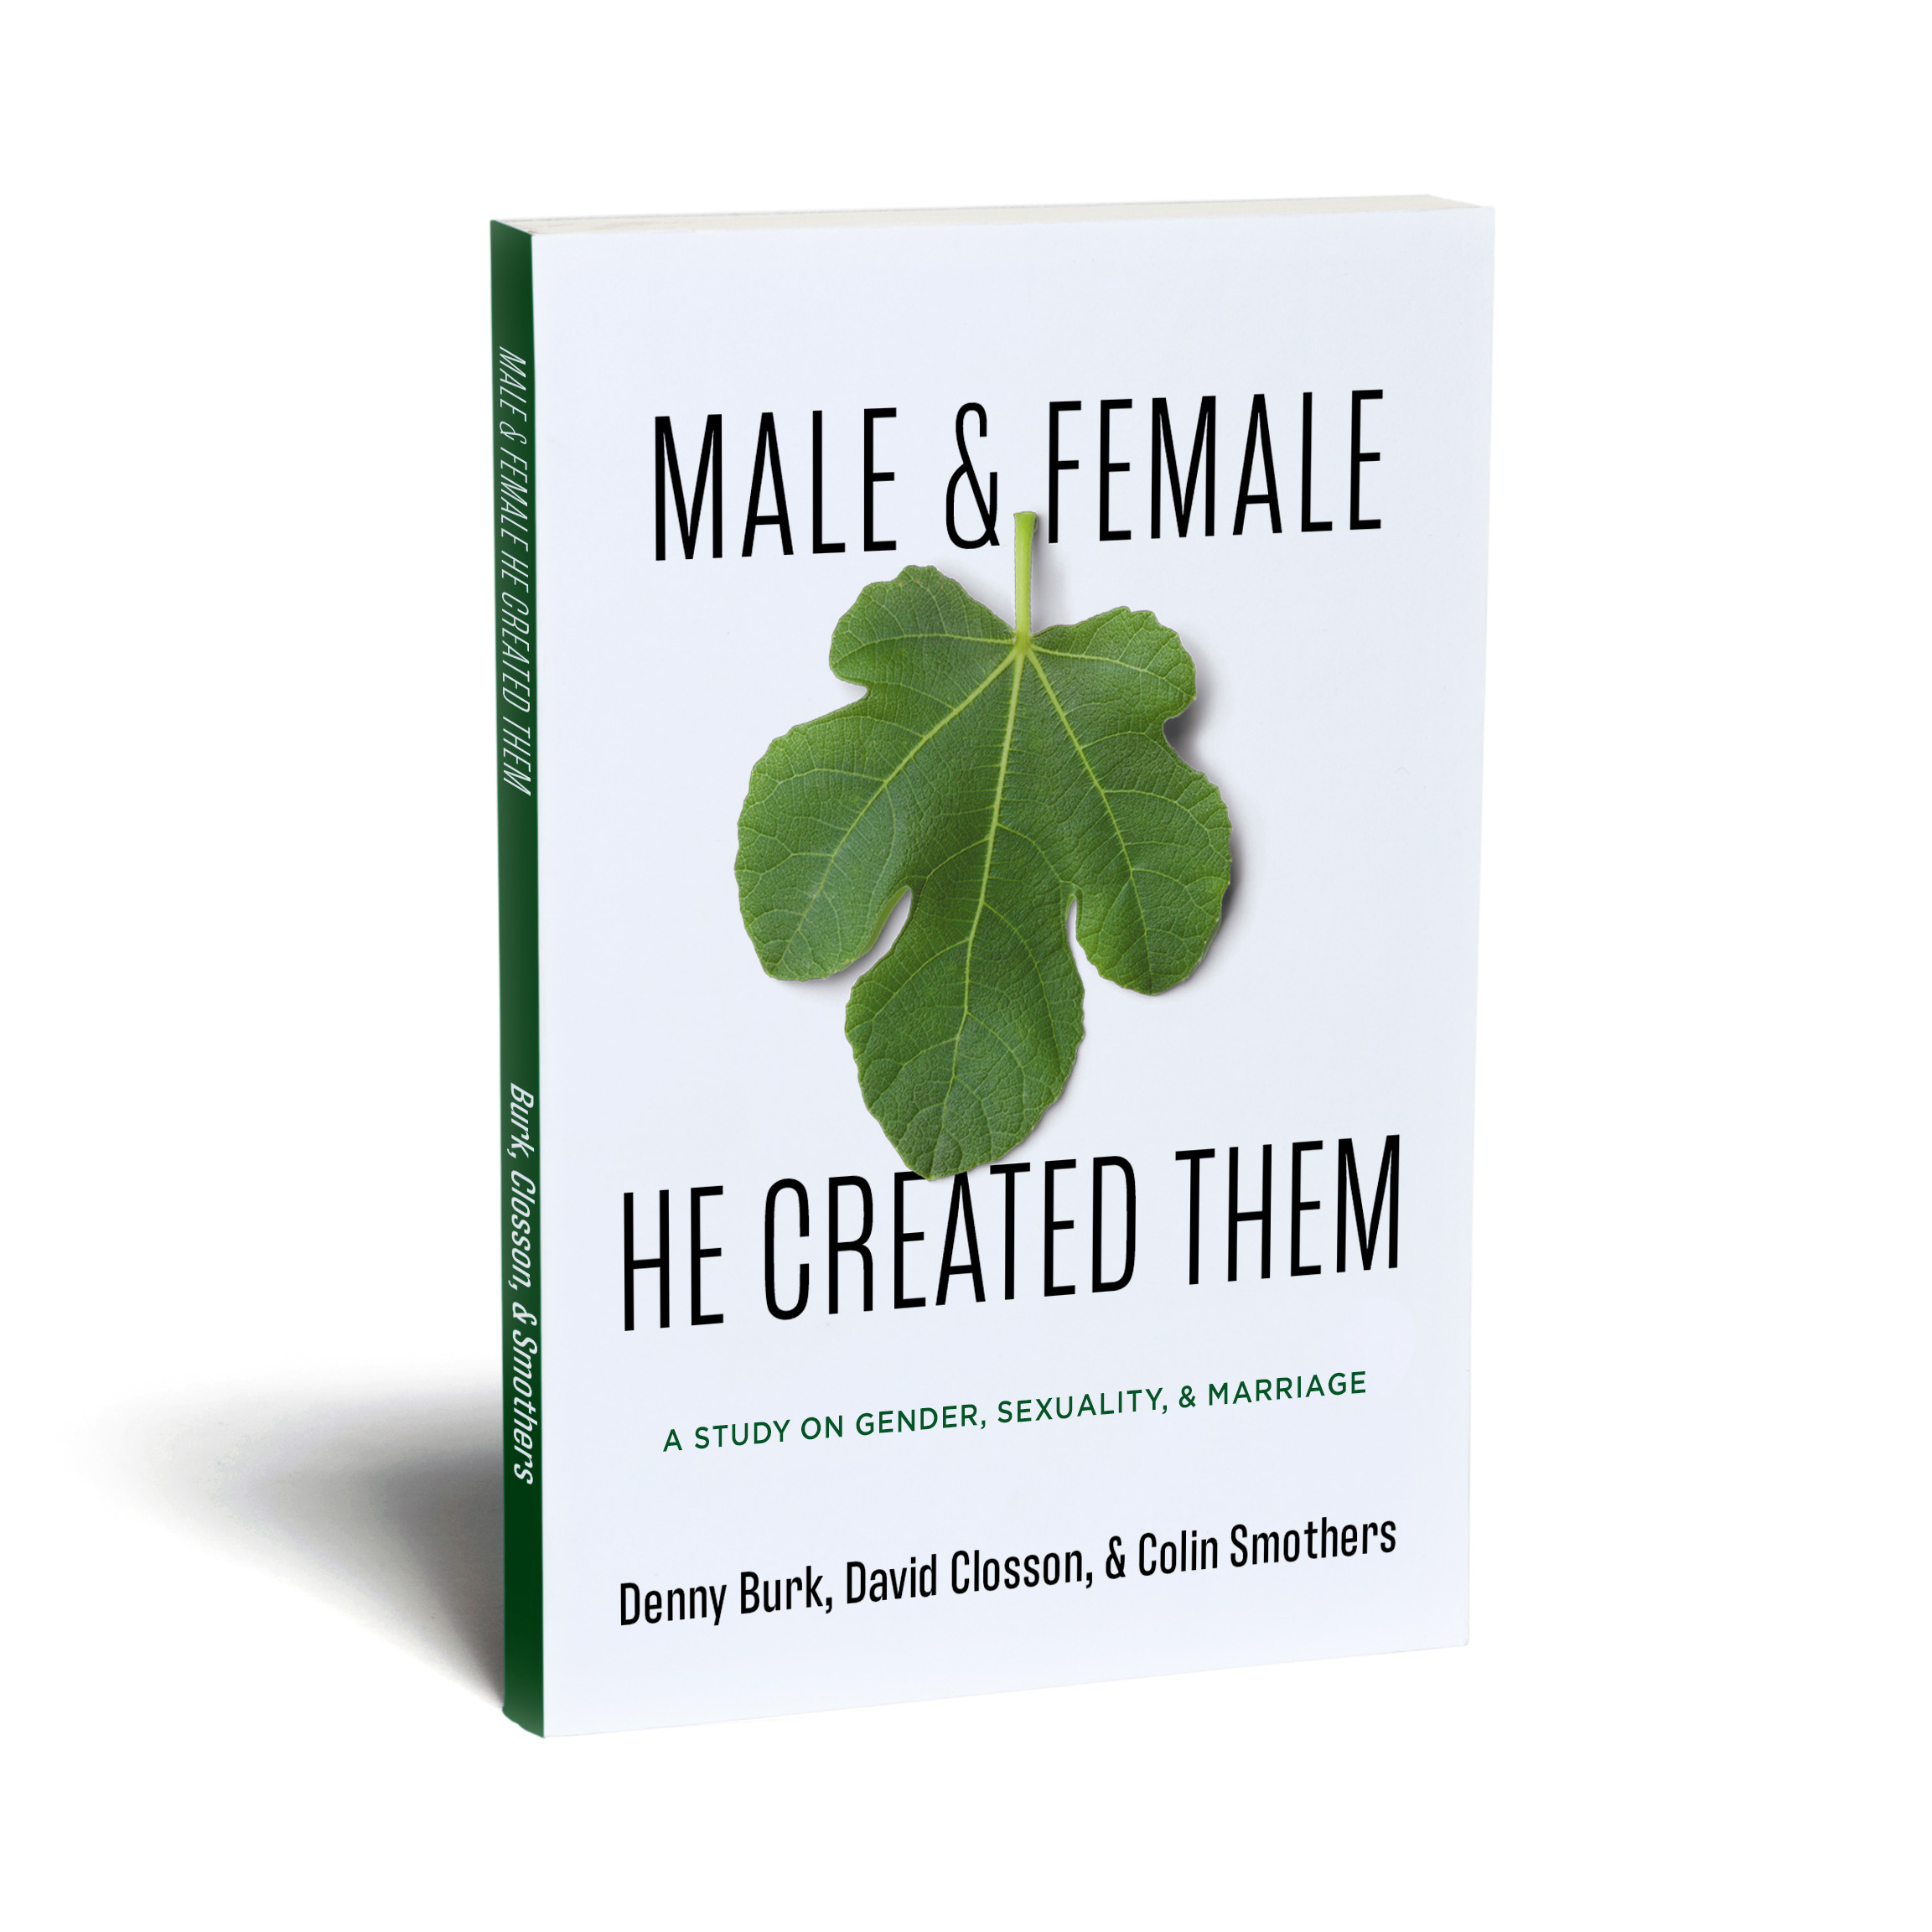 Male & Female He Created Them book cover